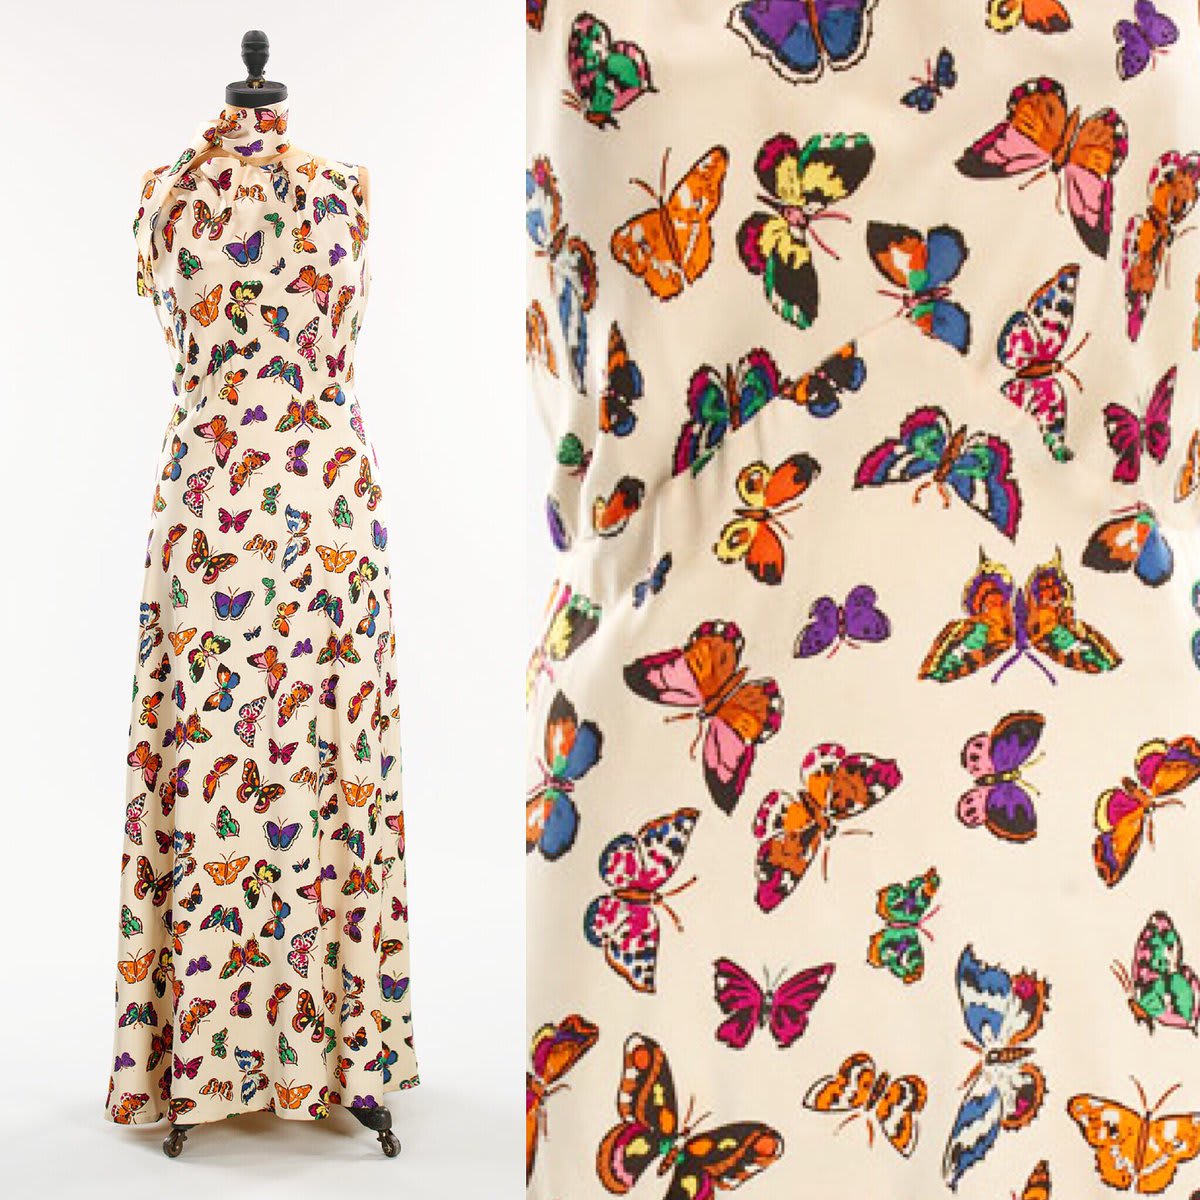 Elsa Schiaparelli's affinity for Surrealism made her the master of whimsical prints, like this summer 1937 butterfly dress. Via